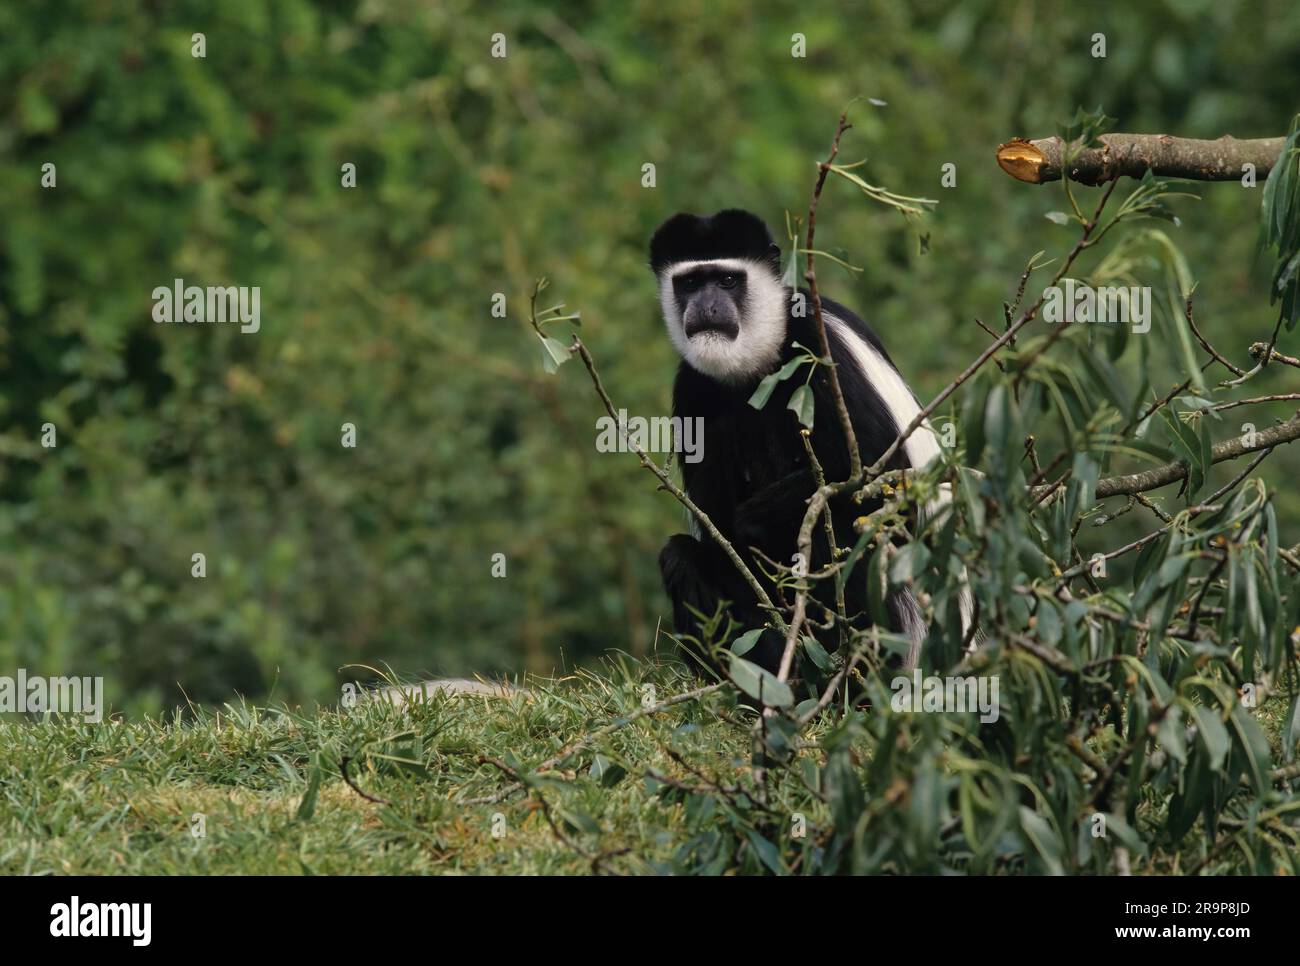 The Angola colobus (Colobus angolensis), Angolan black-and-white colobus, or Angolan colobus is a primate species of Old World monkey belonging to the Stock Photo